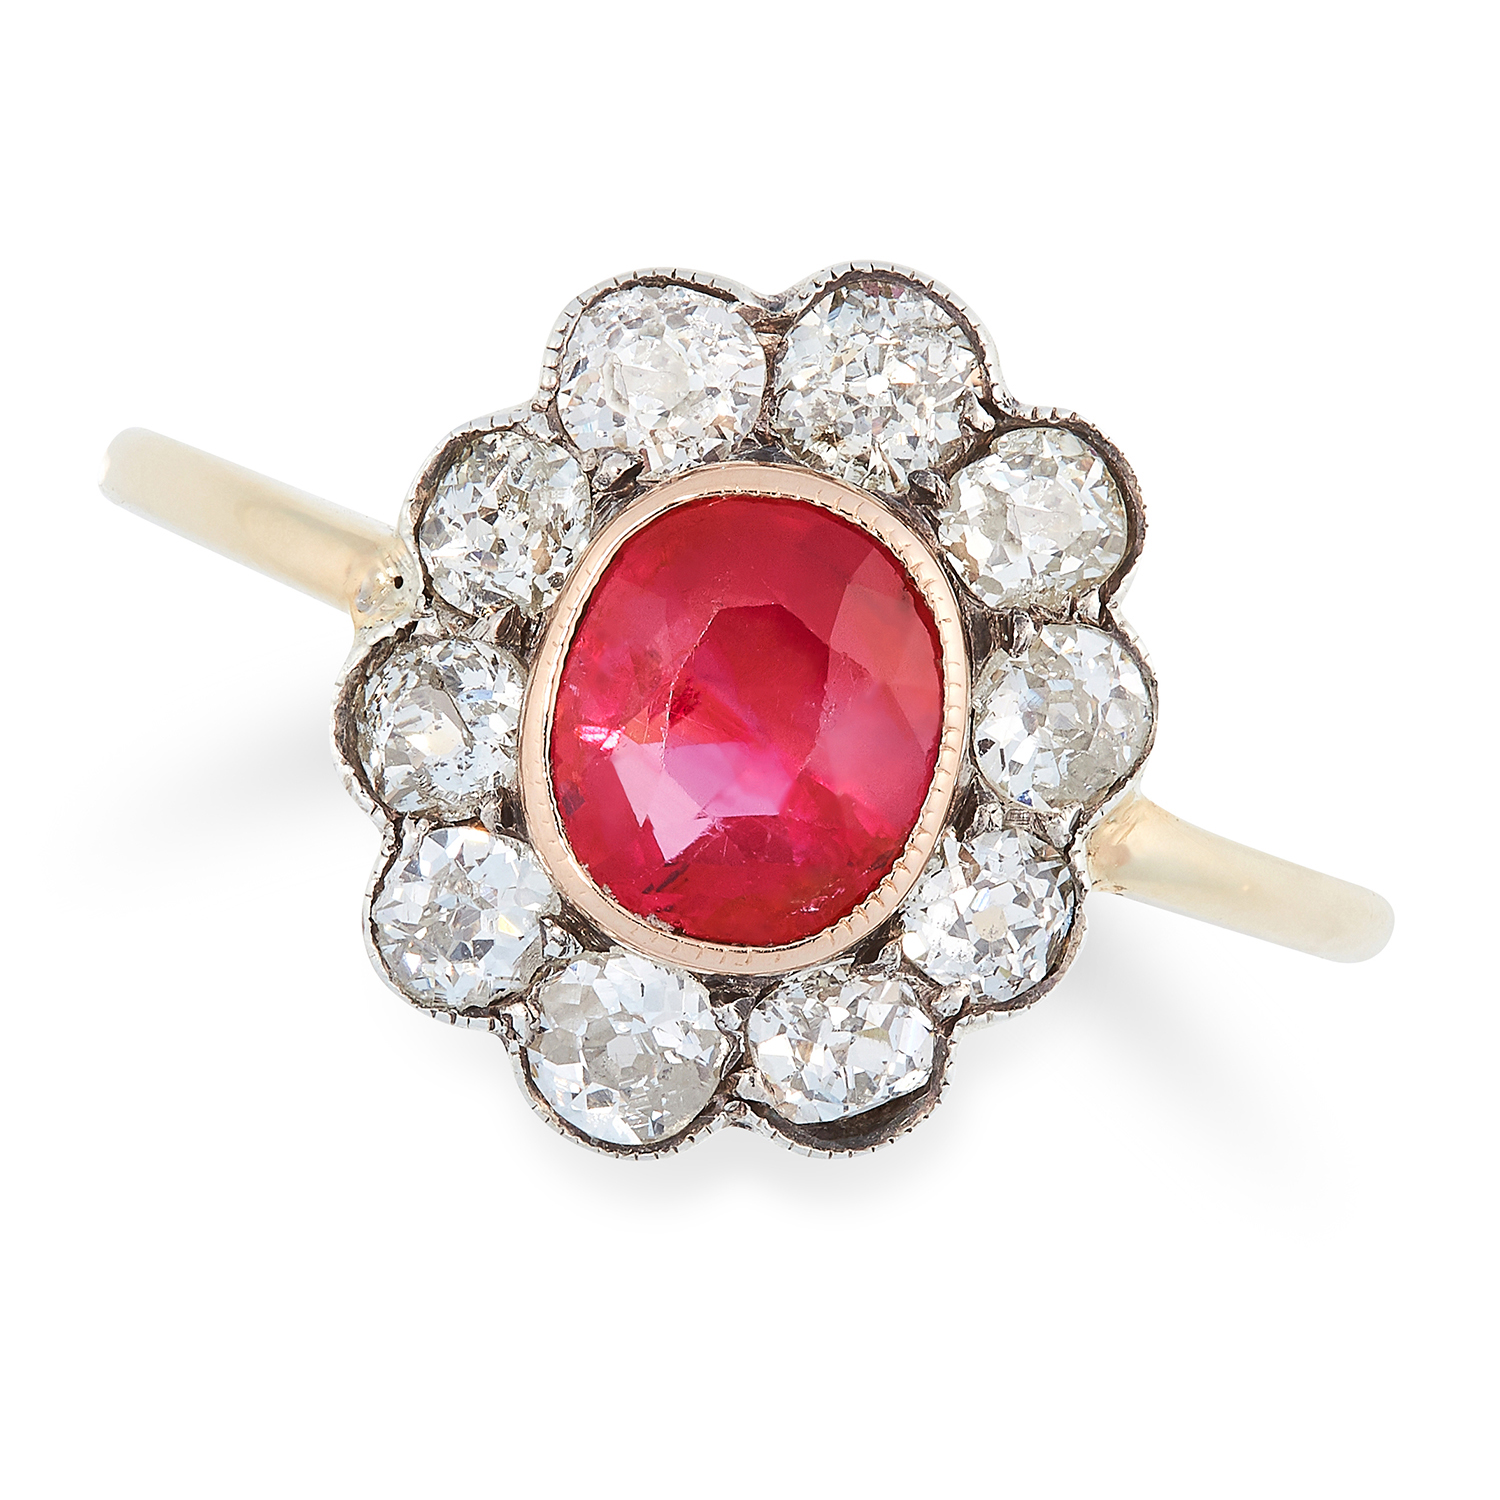 AN ANTIQUE 1.50 CARAT BURMA NO HEAT RUBY AND DIAMOND RING in high carat gold, set with a cushion cut